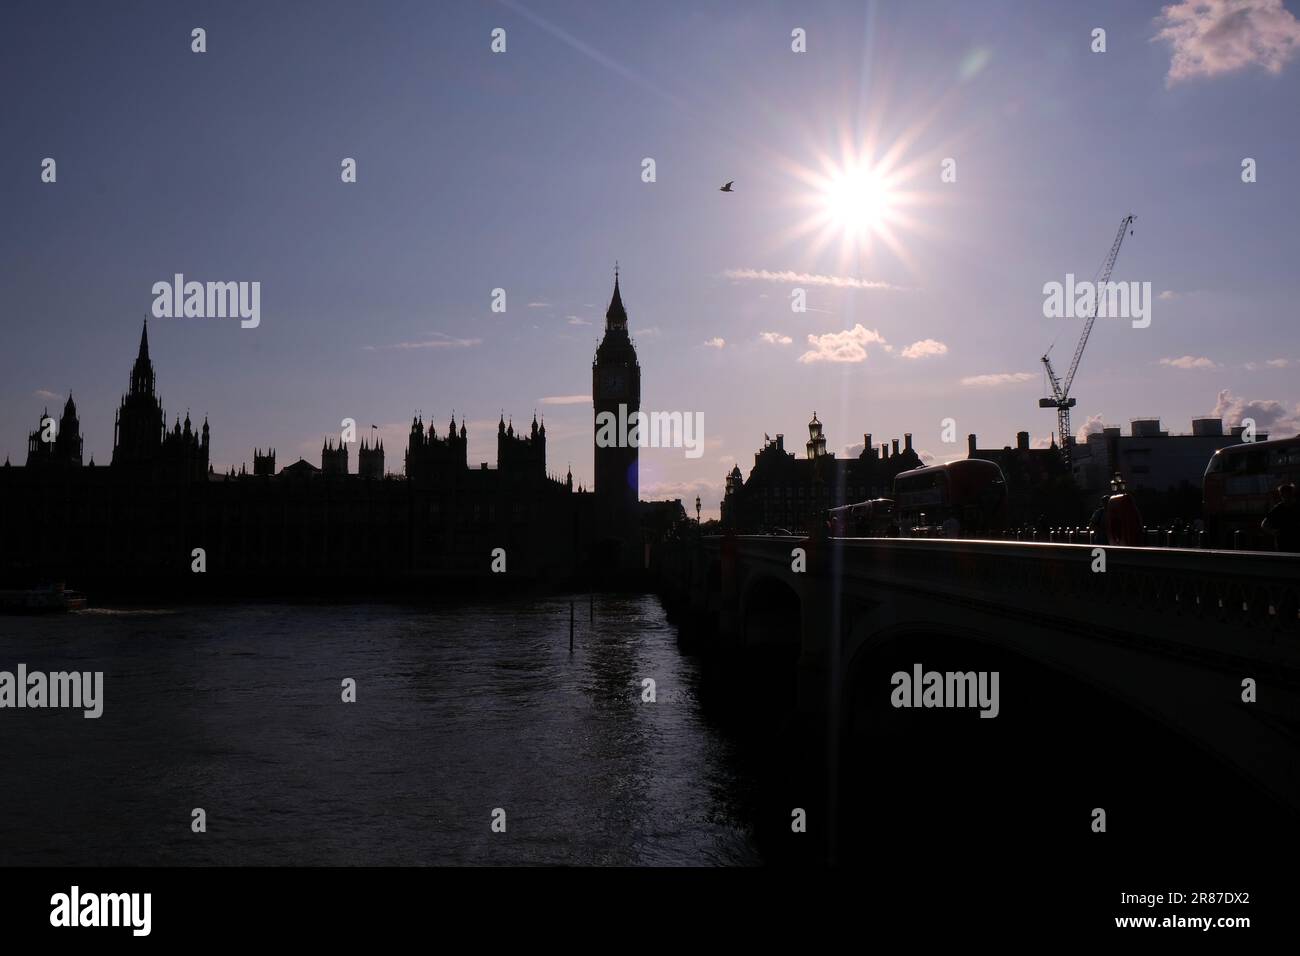 The Houses of Parliament in silhouette with the sun seen in a starburst effect. MPs inside debate and vote on Partygate report late into the evening. Stock Photo